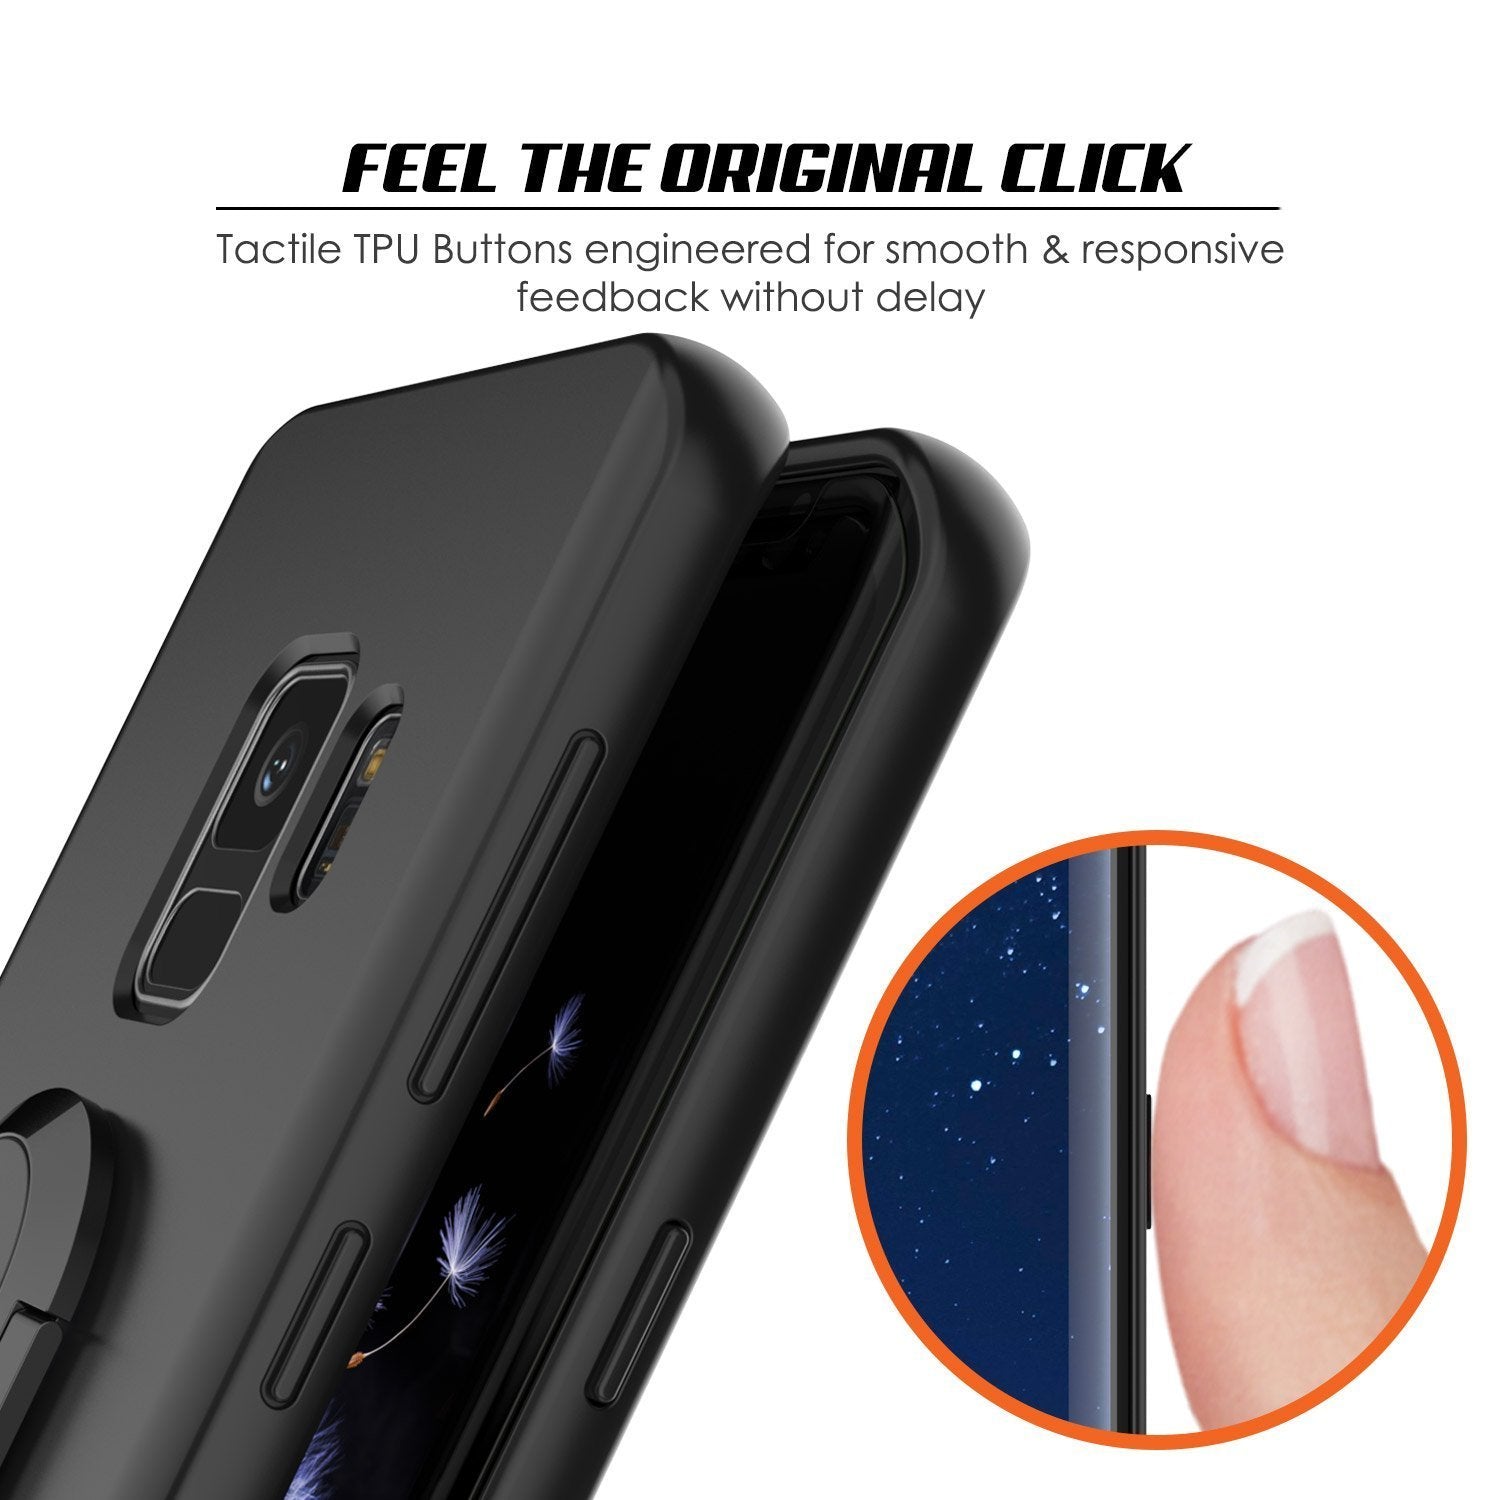 Galaxy S9 Case, Punkcase Magnetix Protective TPU Cover W/ Kickstand, Ring Grip Holder & Metal Plate for Magnetic Car Phone Mount PLUS PunkShield Screen Protector for Samsung S9 Edge [Black]